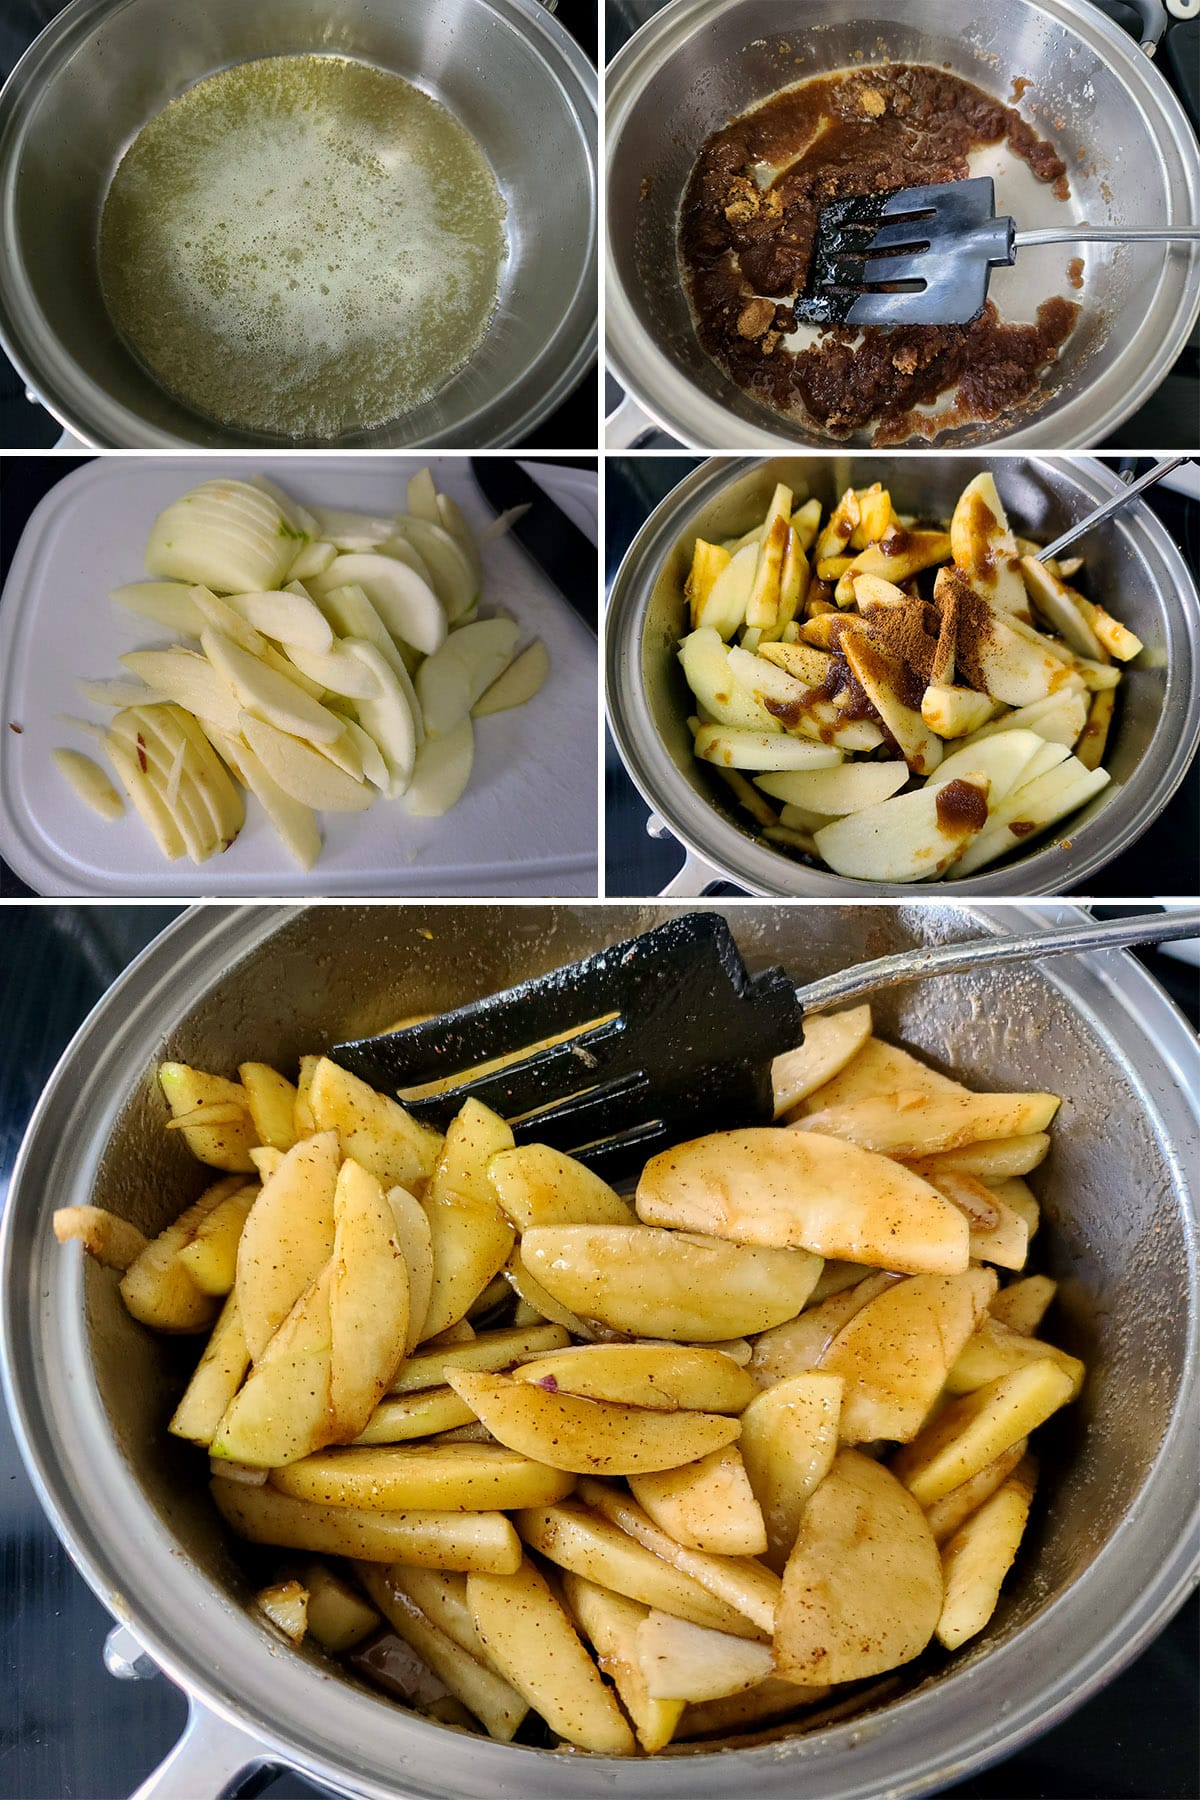 A 5 part image showing the apple filling ingredients being mixed in a bowl then transferred to a pan.